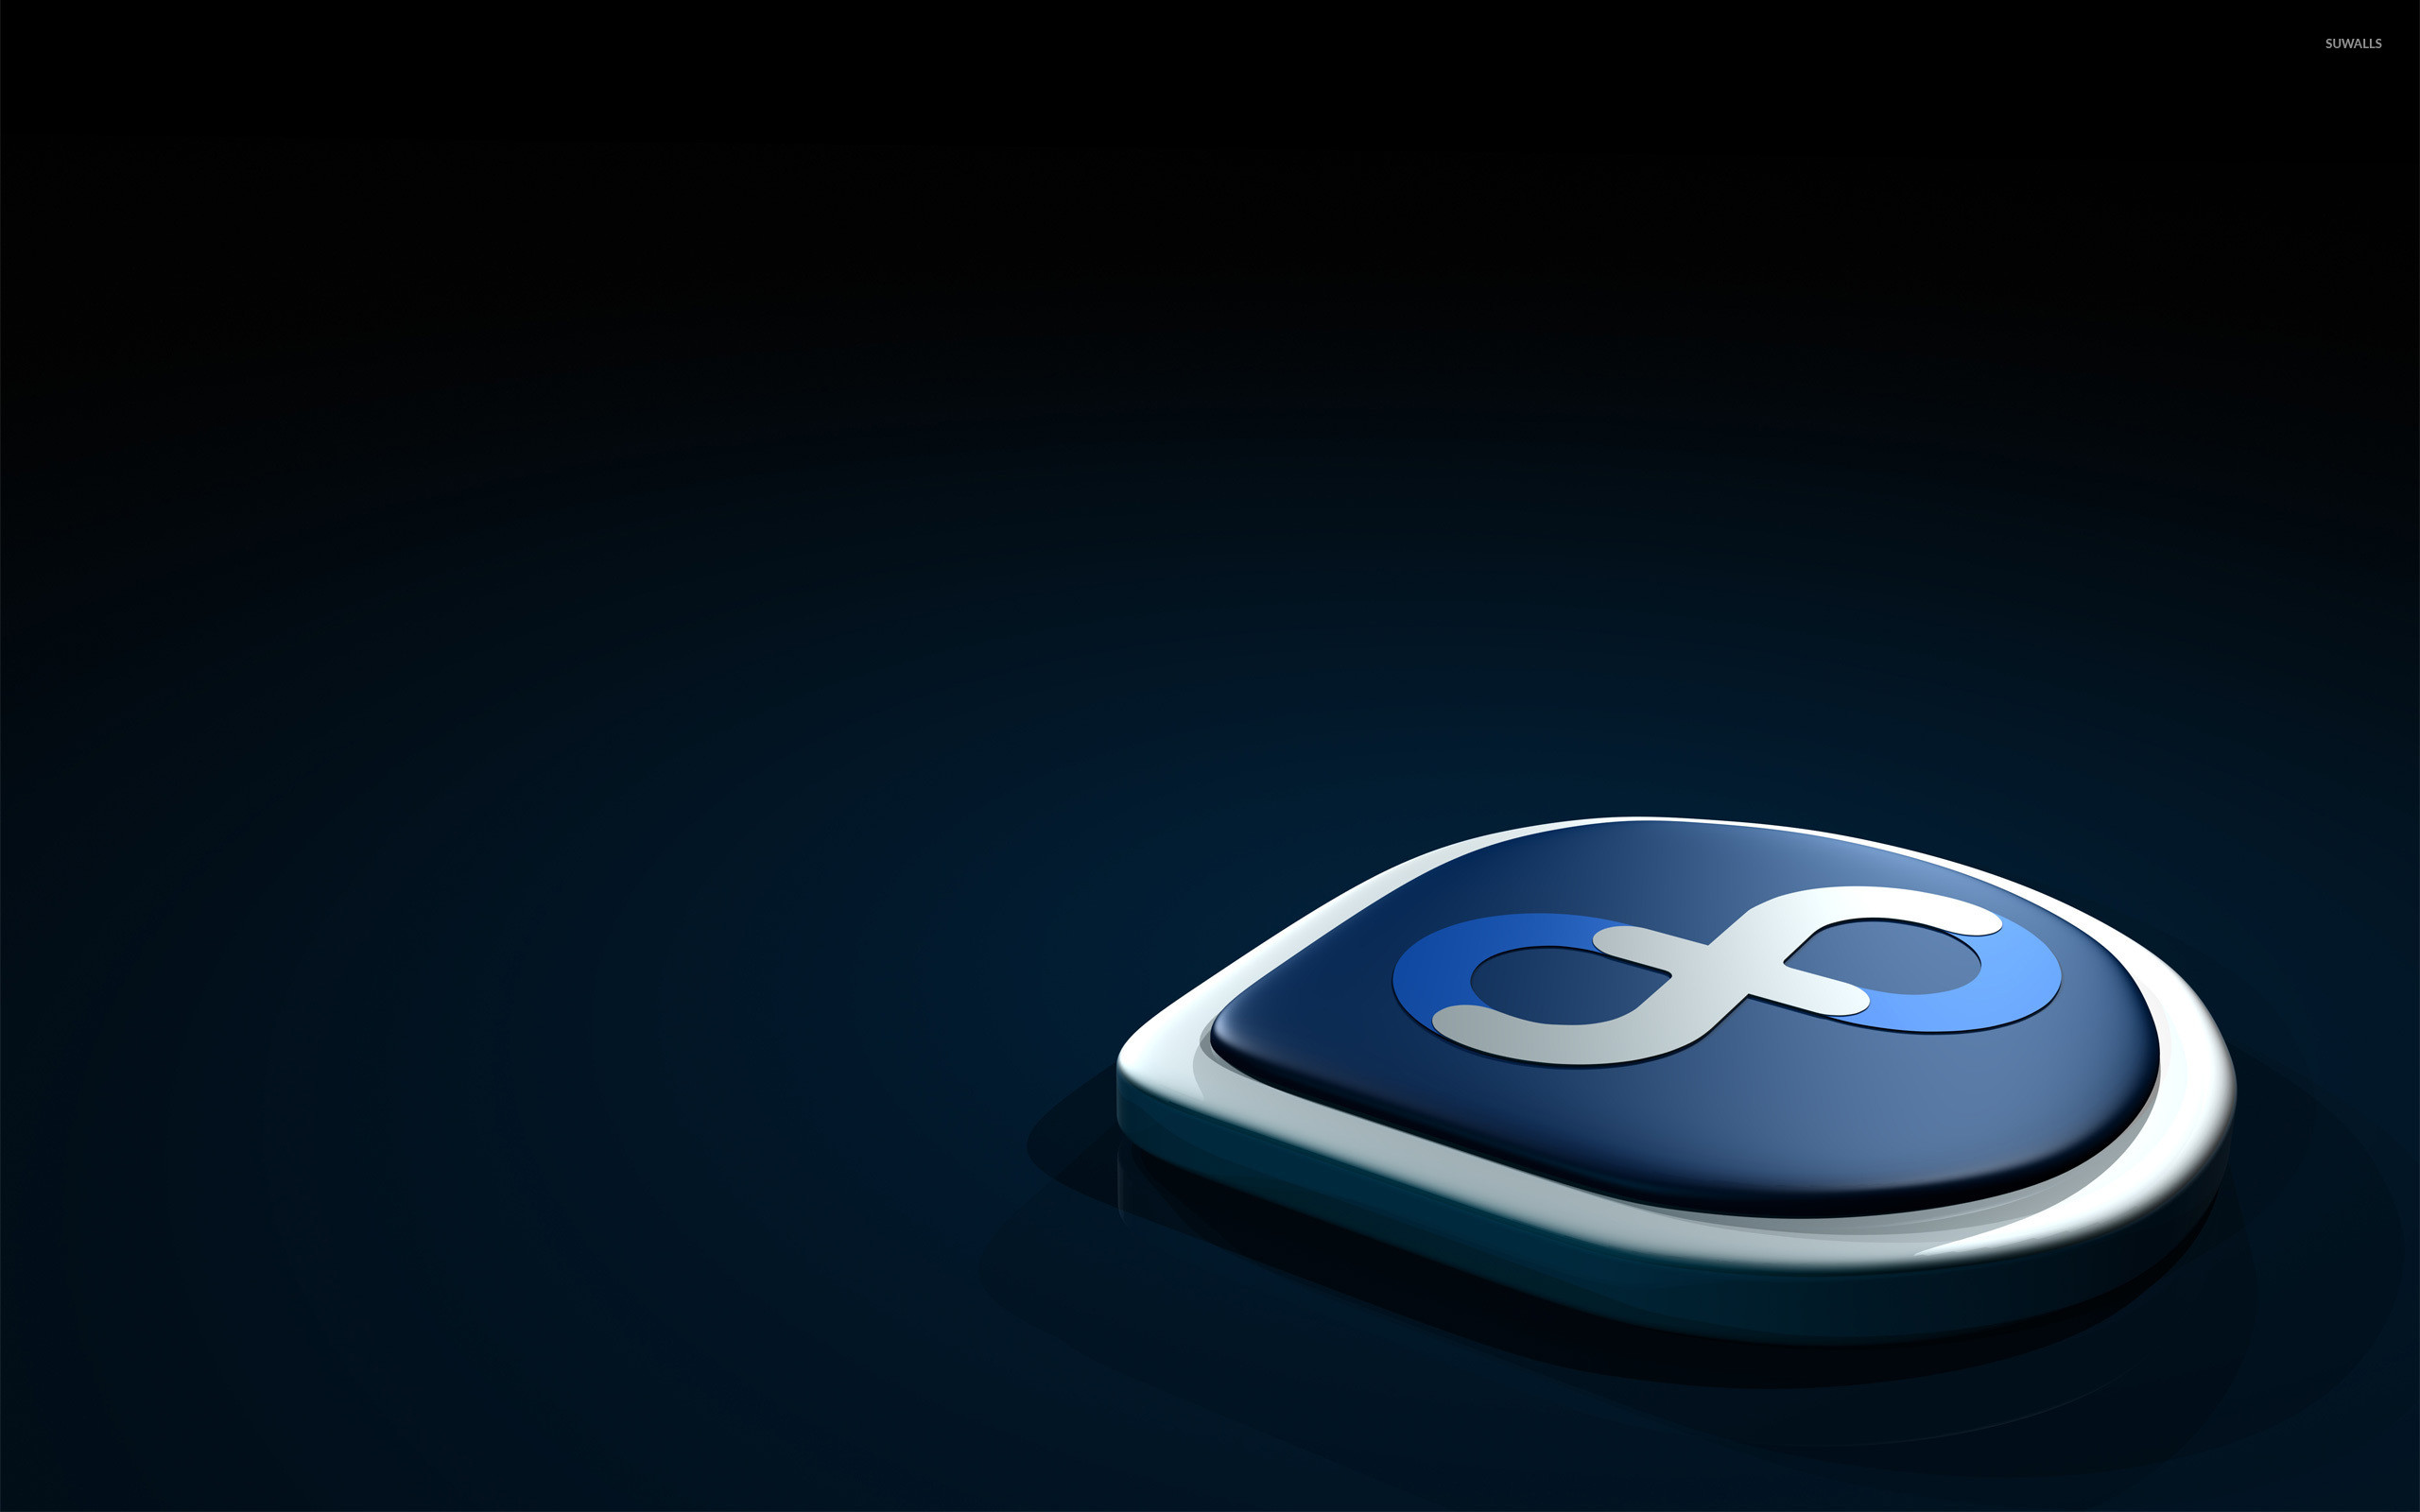 Fedora Wallpapers from Fedora Core 1 to Fedora 38 Workstation   OpenSourceFeed